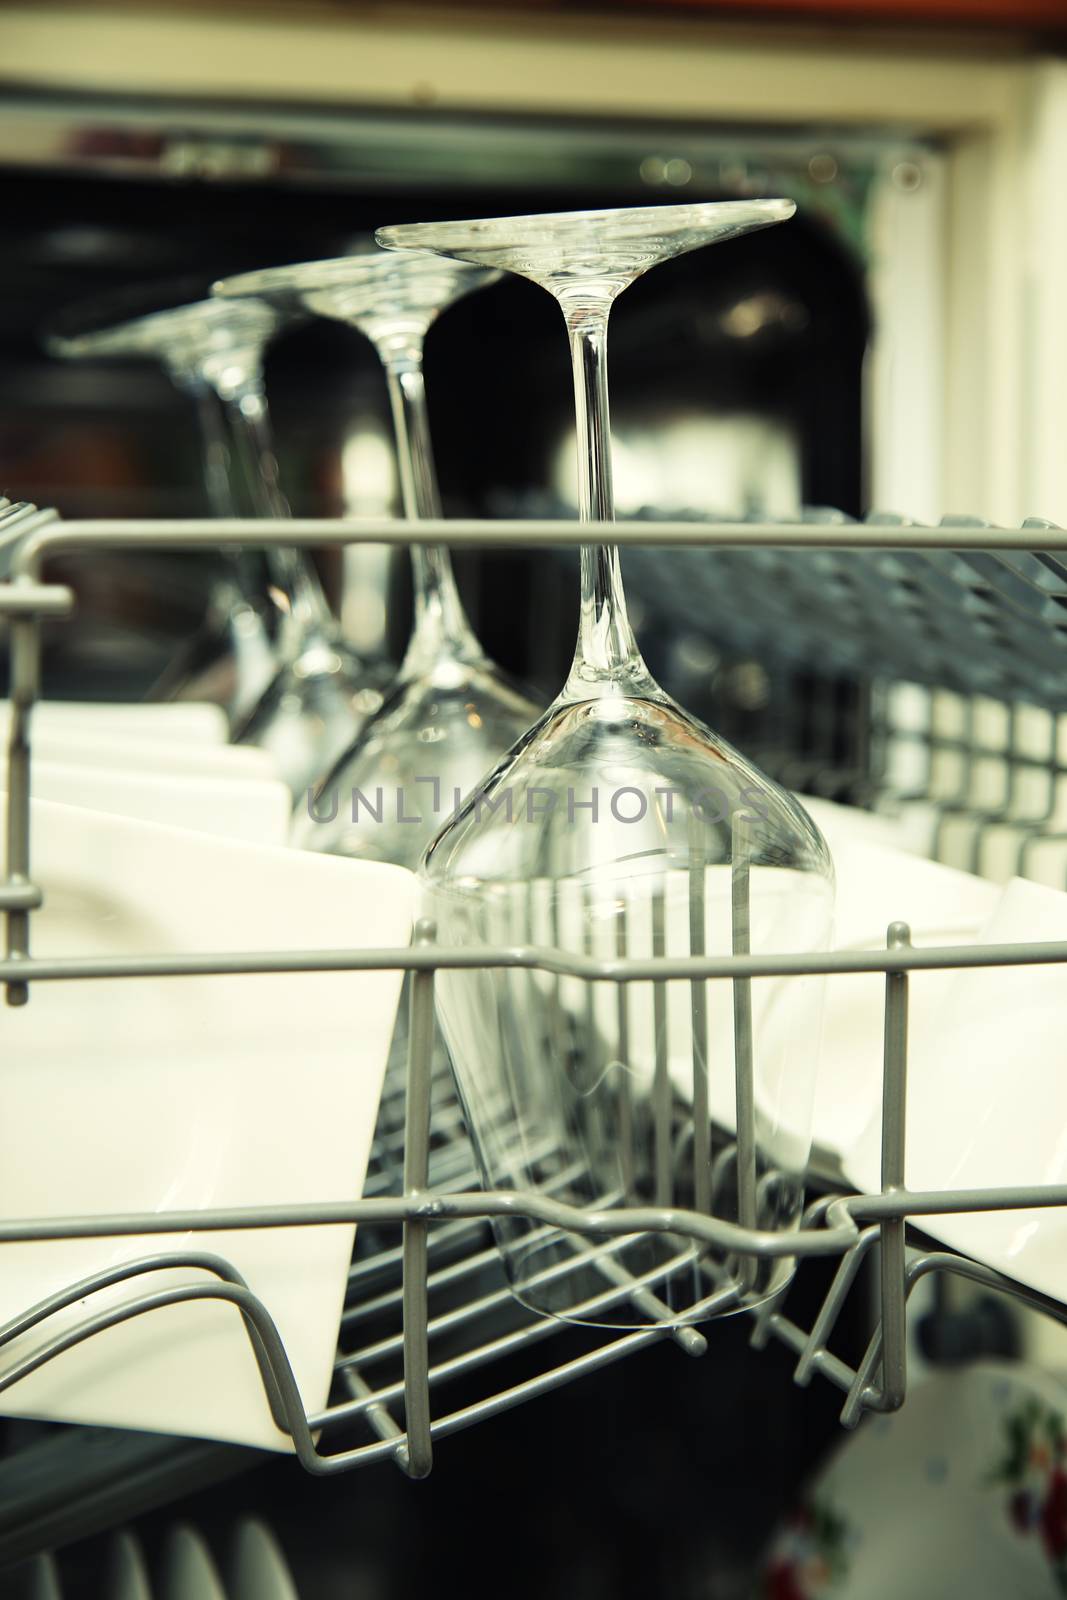 details of Open dishwasher with clean utensils by vladacanon